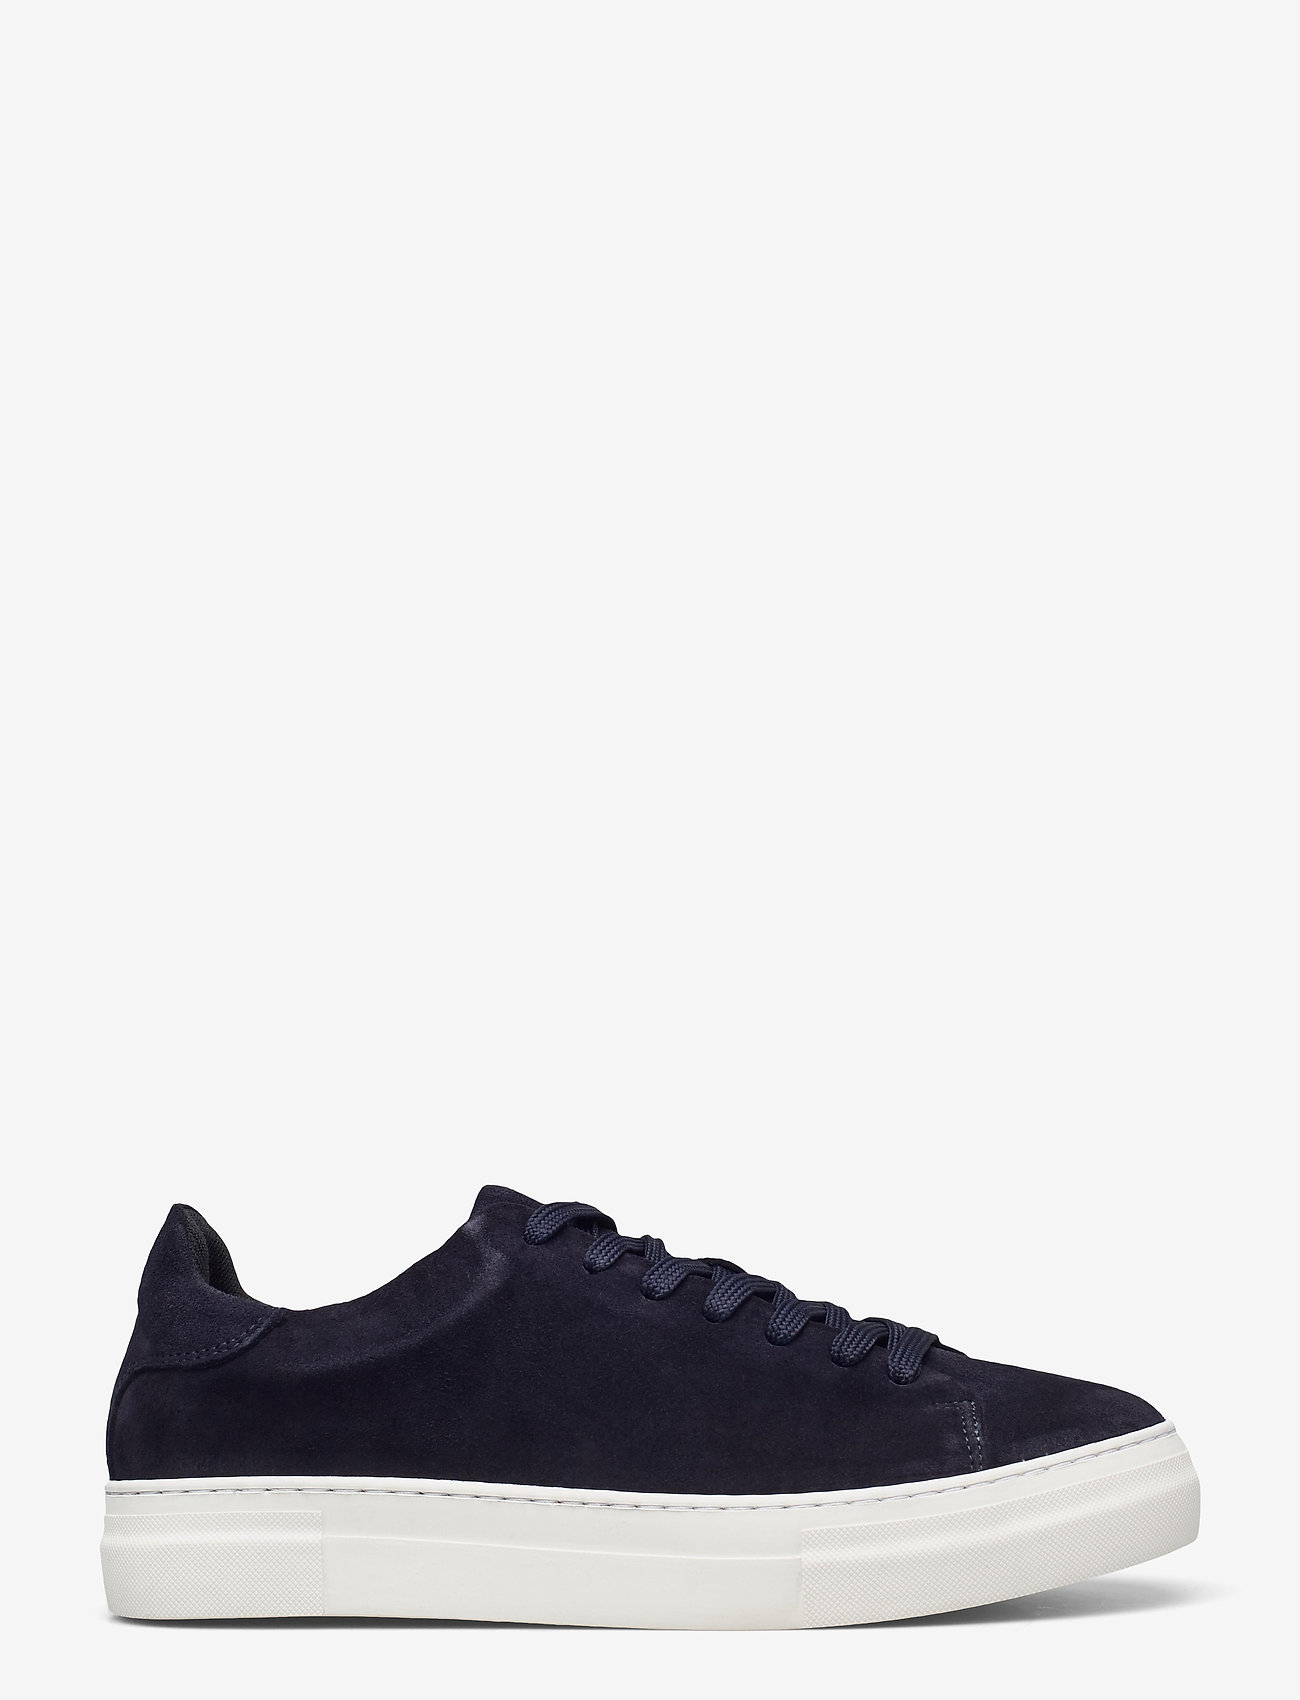 Selected Homme - SLHDAVID CHUNKY CLEAN SUEDE TRAINER B - low tops - dark navy - 1